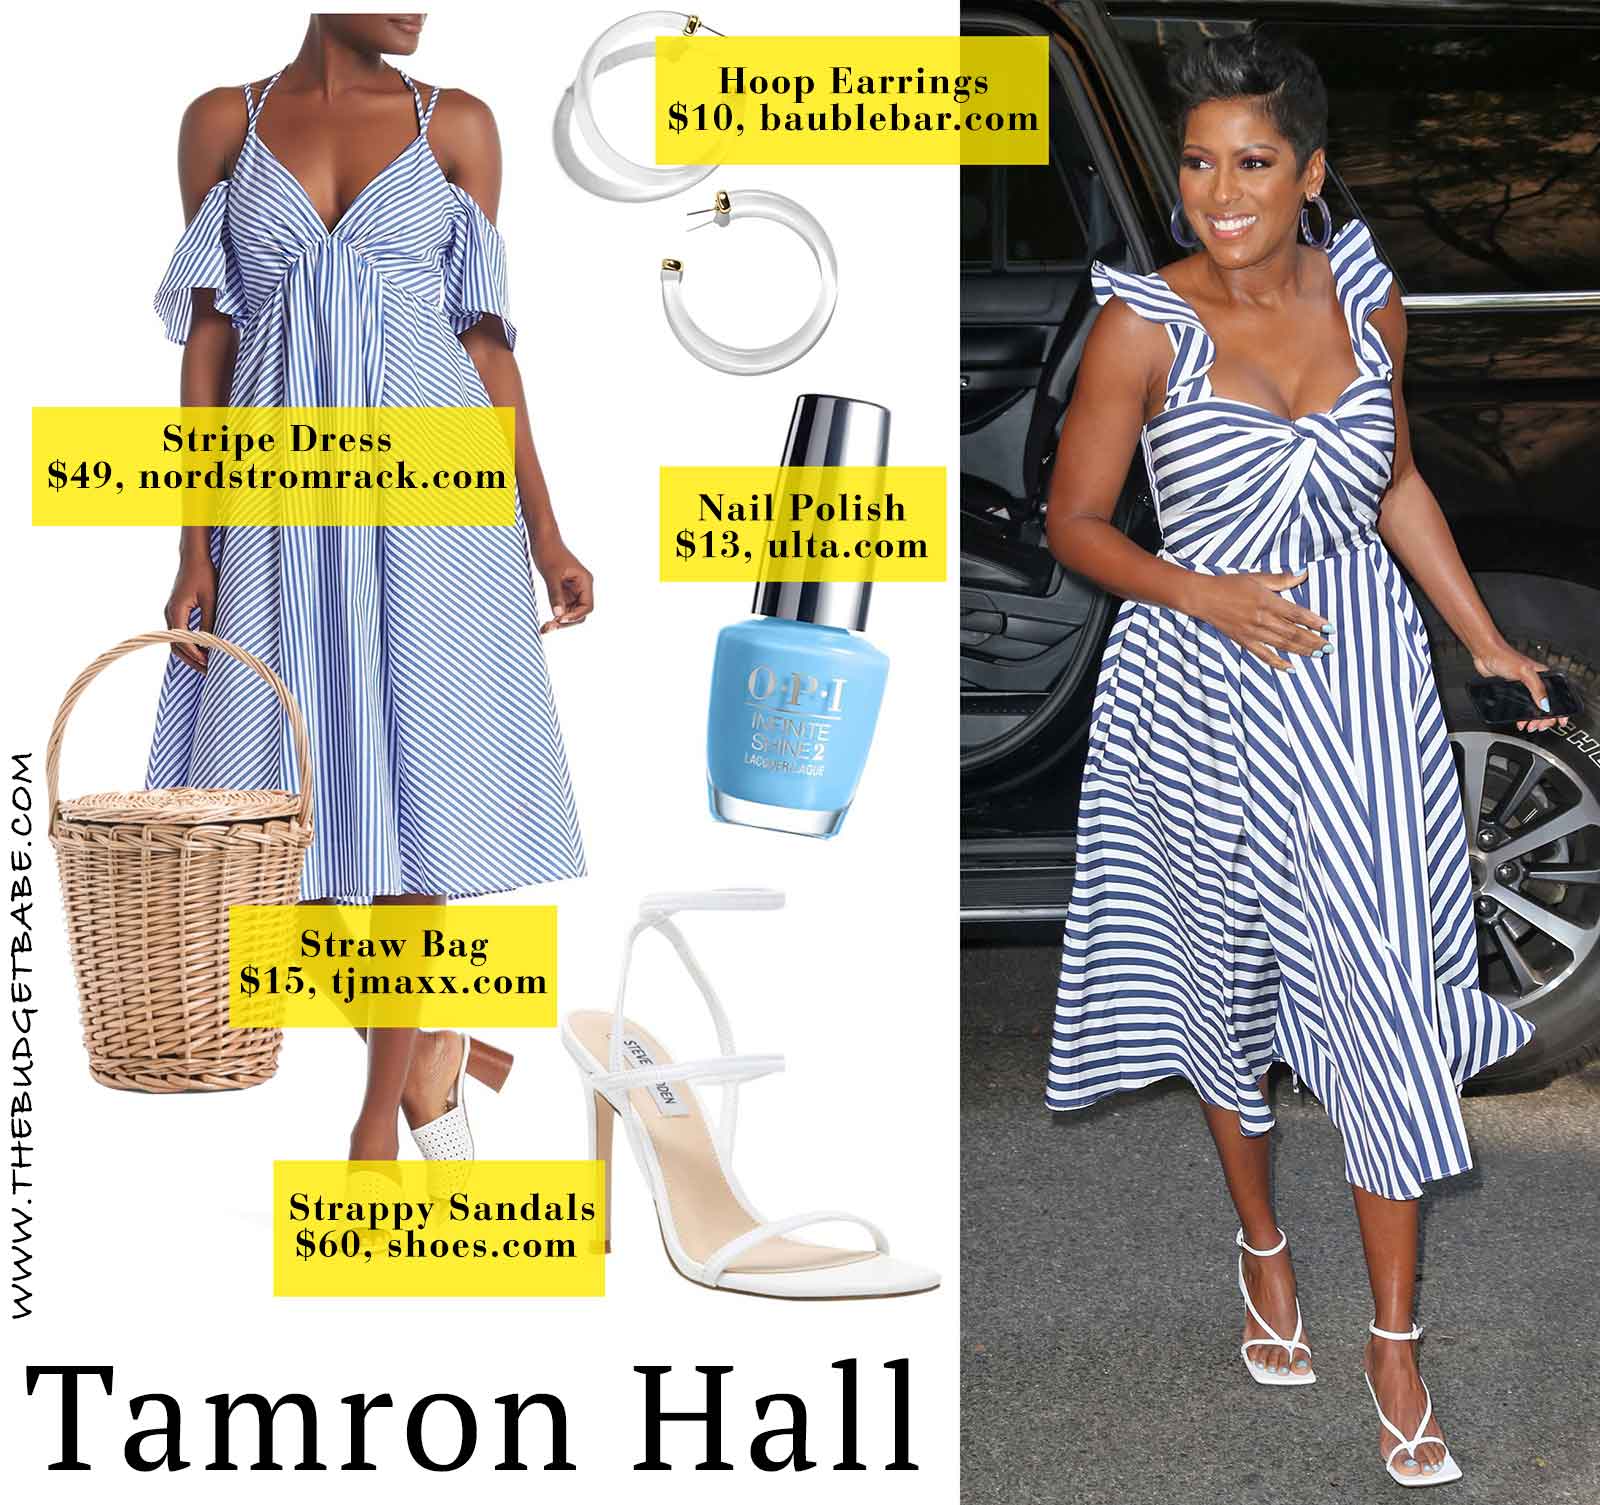 Tamron Hall in Jason Wu - love this look!